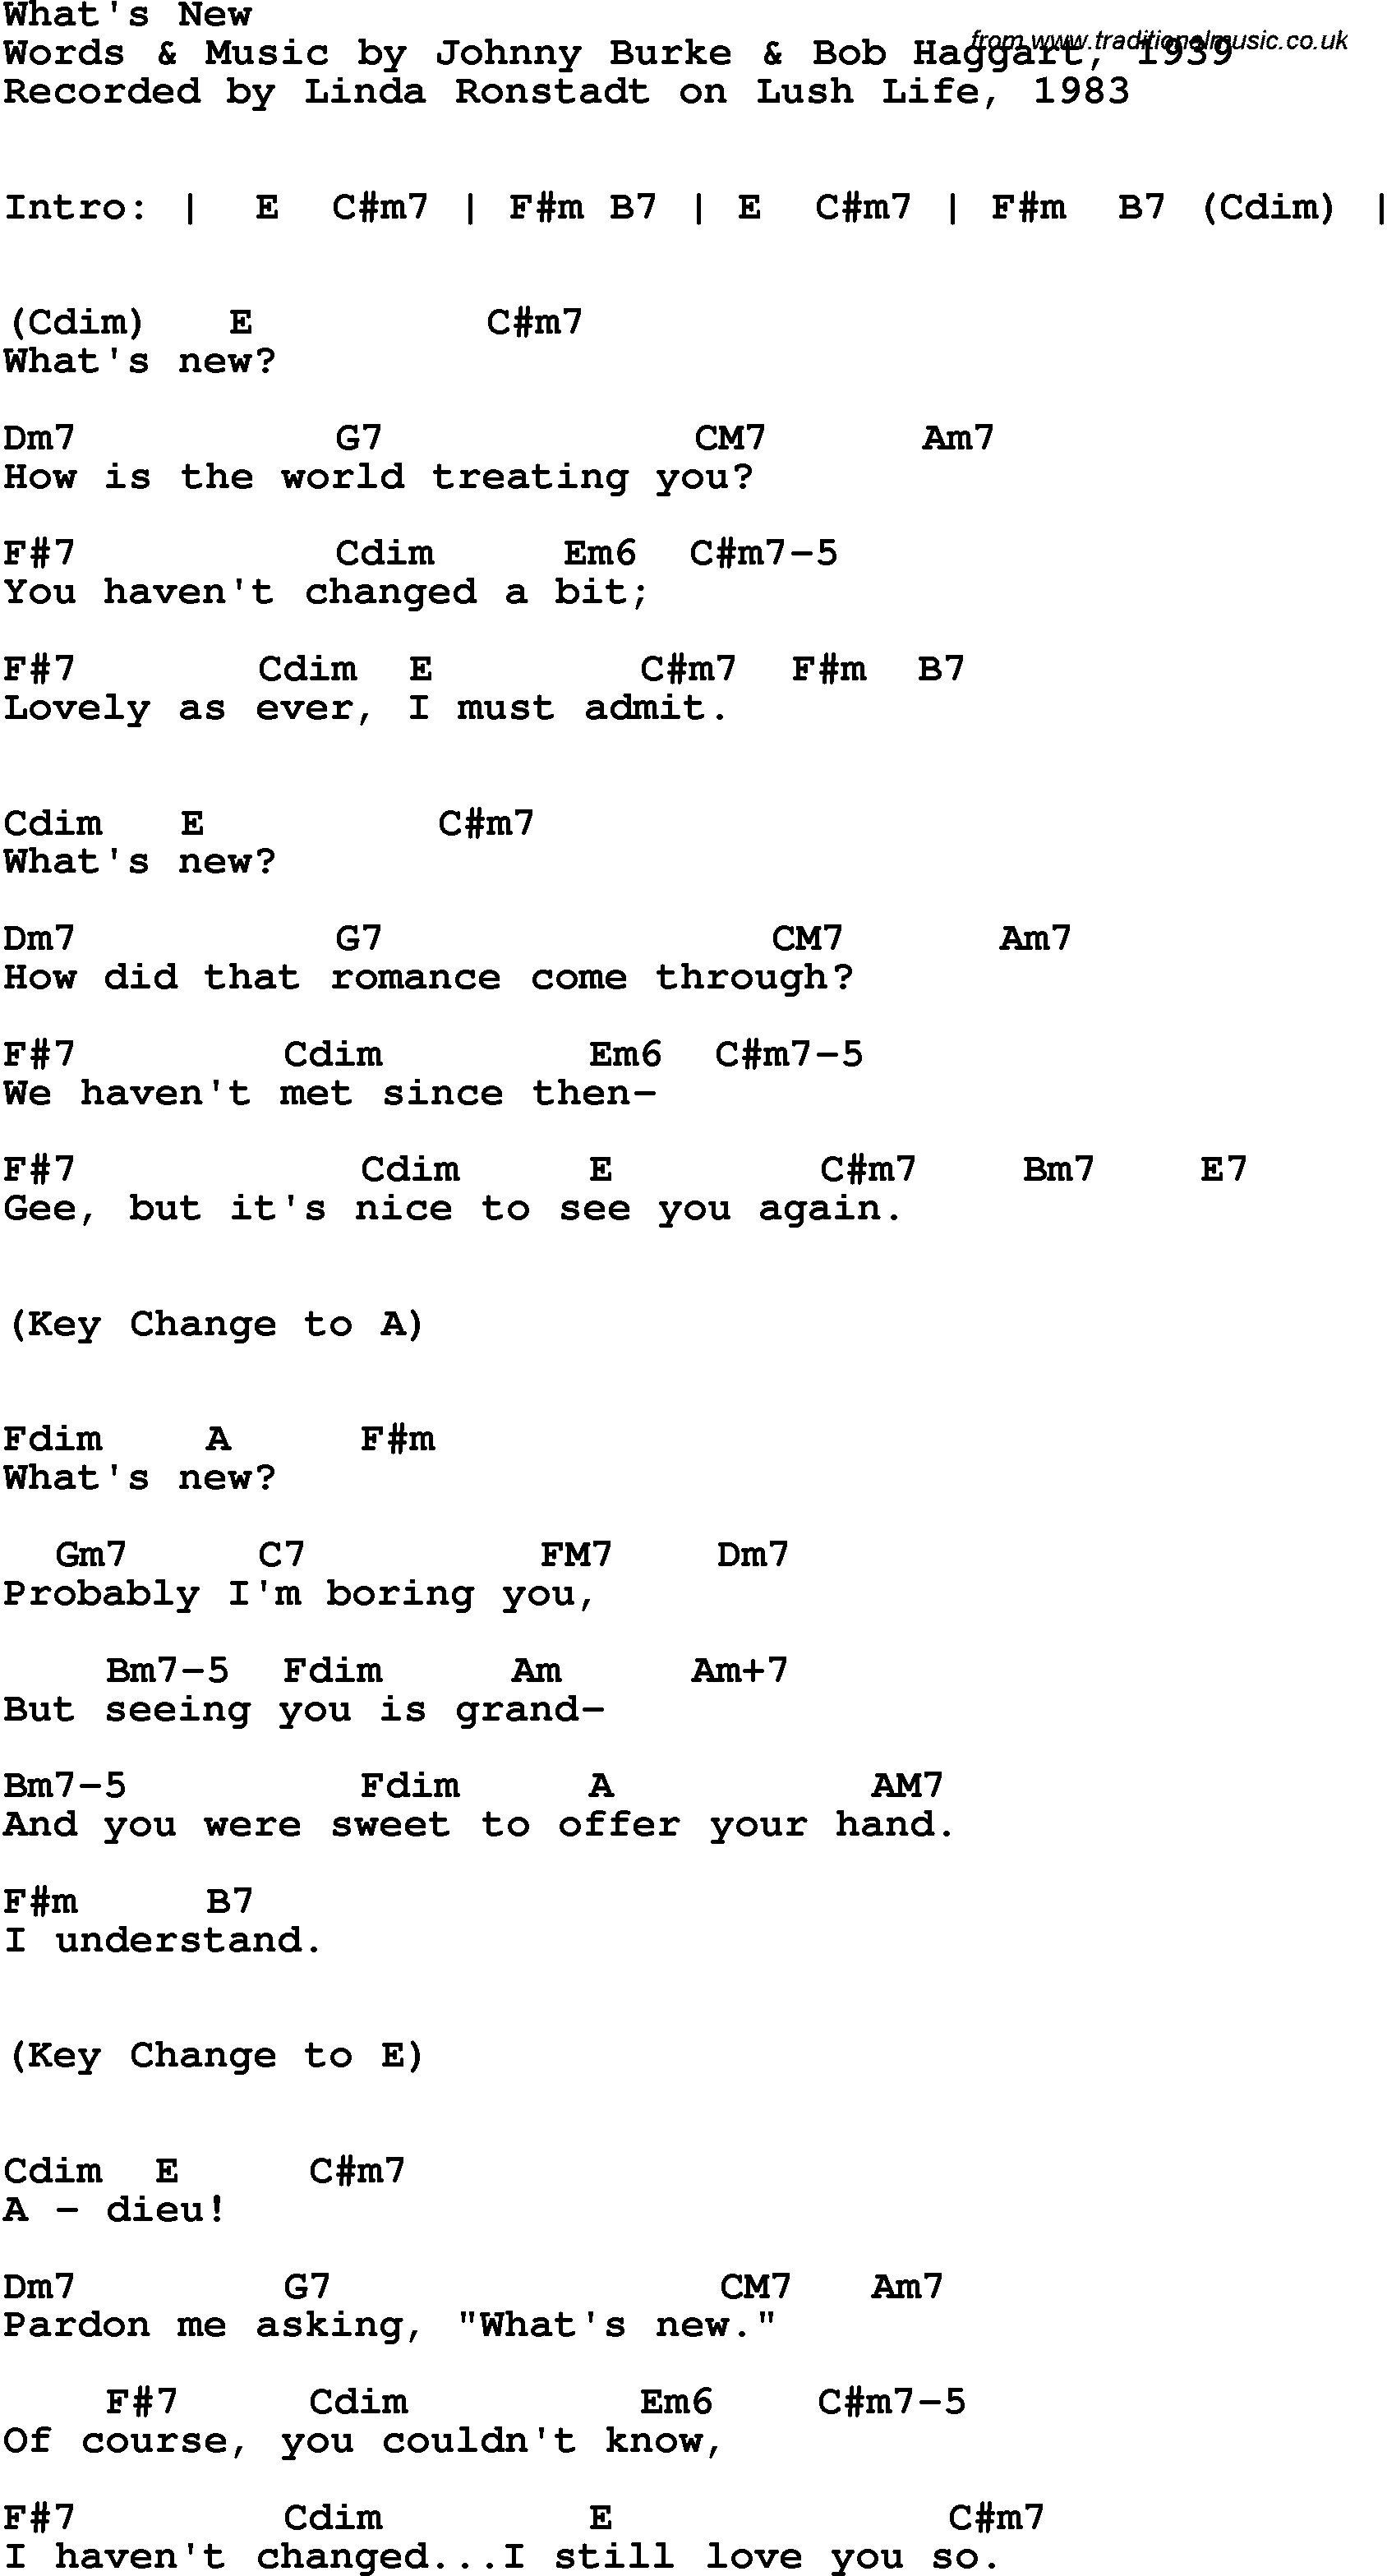 Song Lyrics with guitar chords for What's New - Linda Ronstadt, 1983